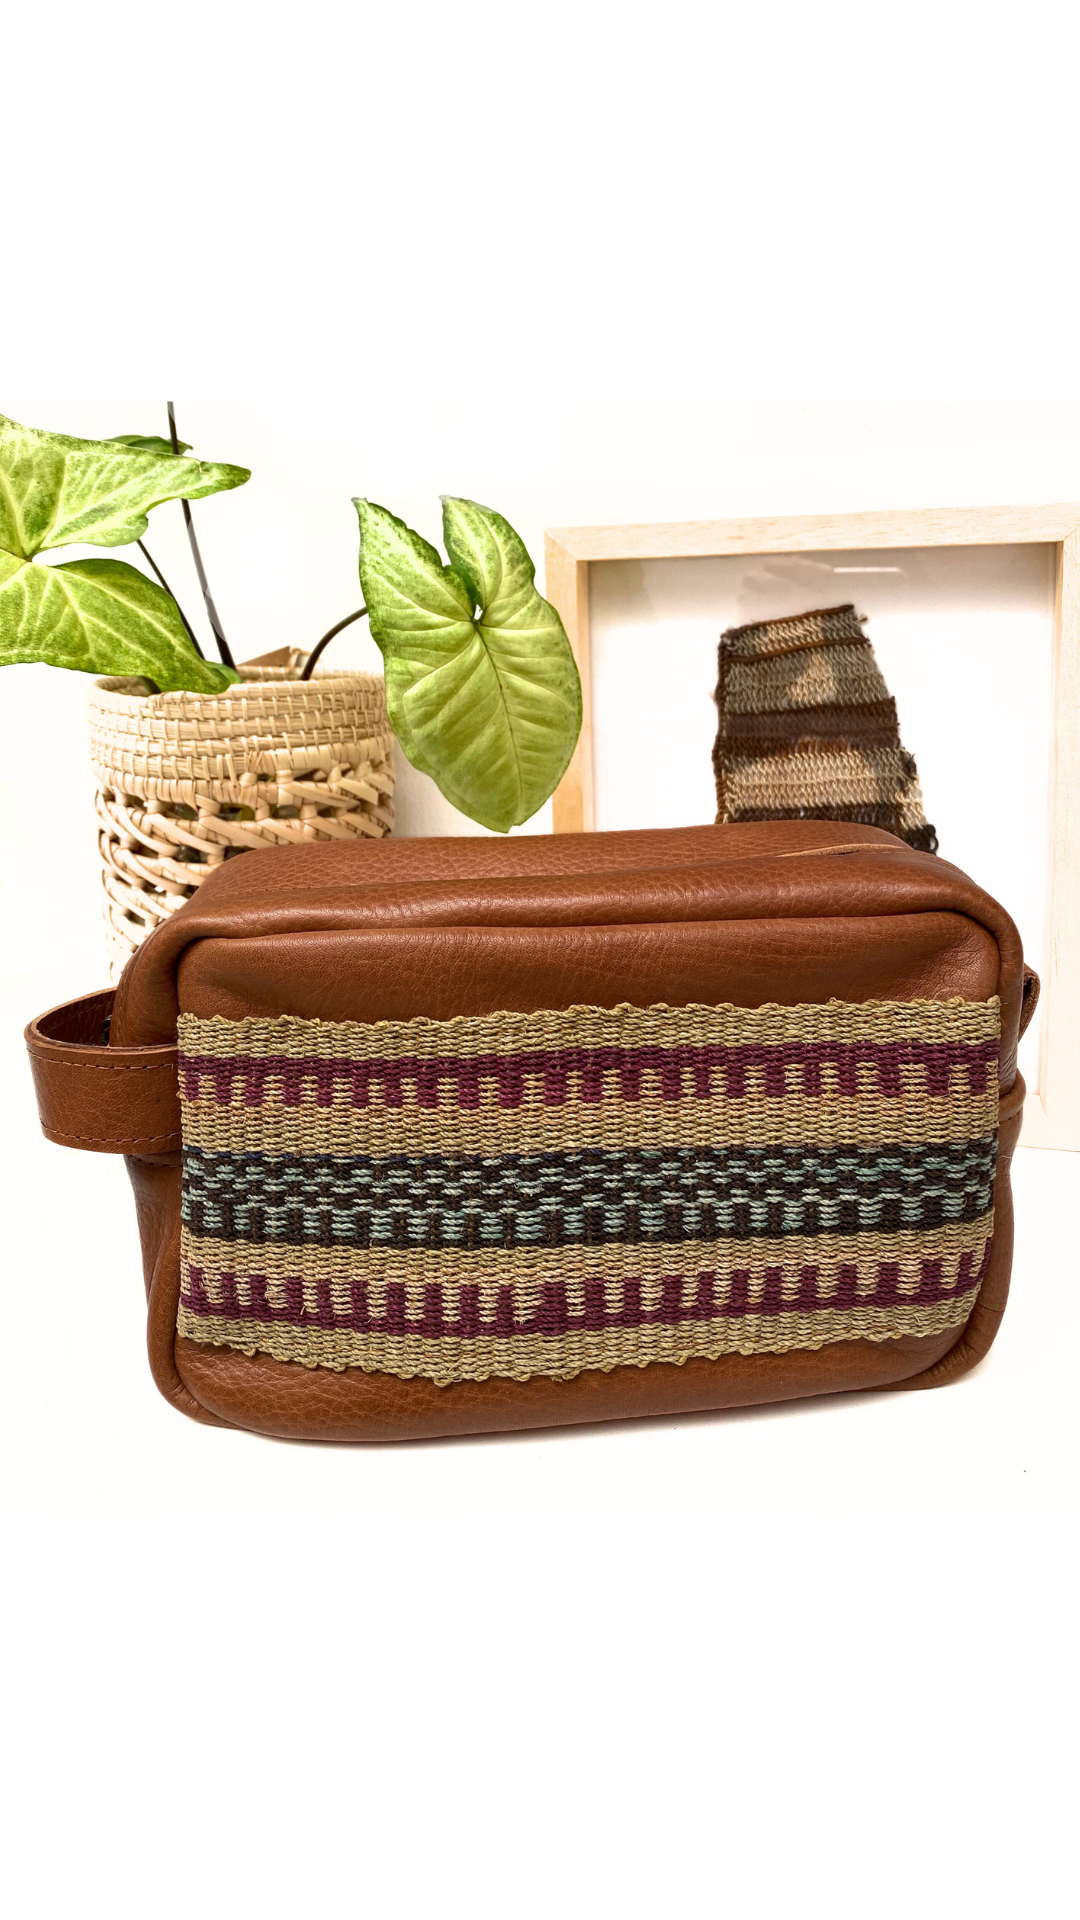 Chaguar and leather Travel bag